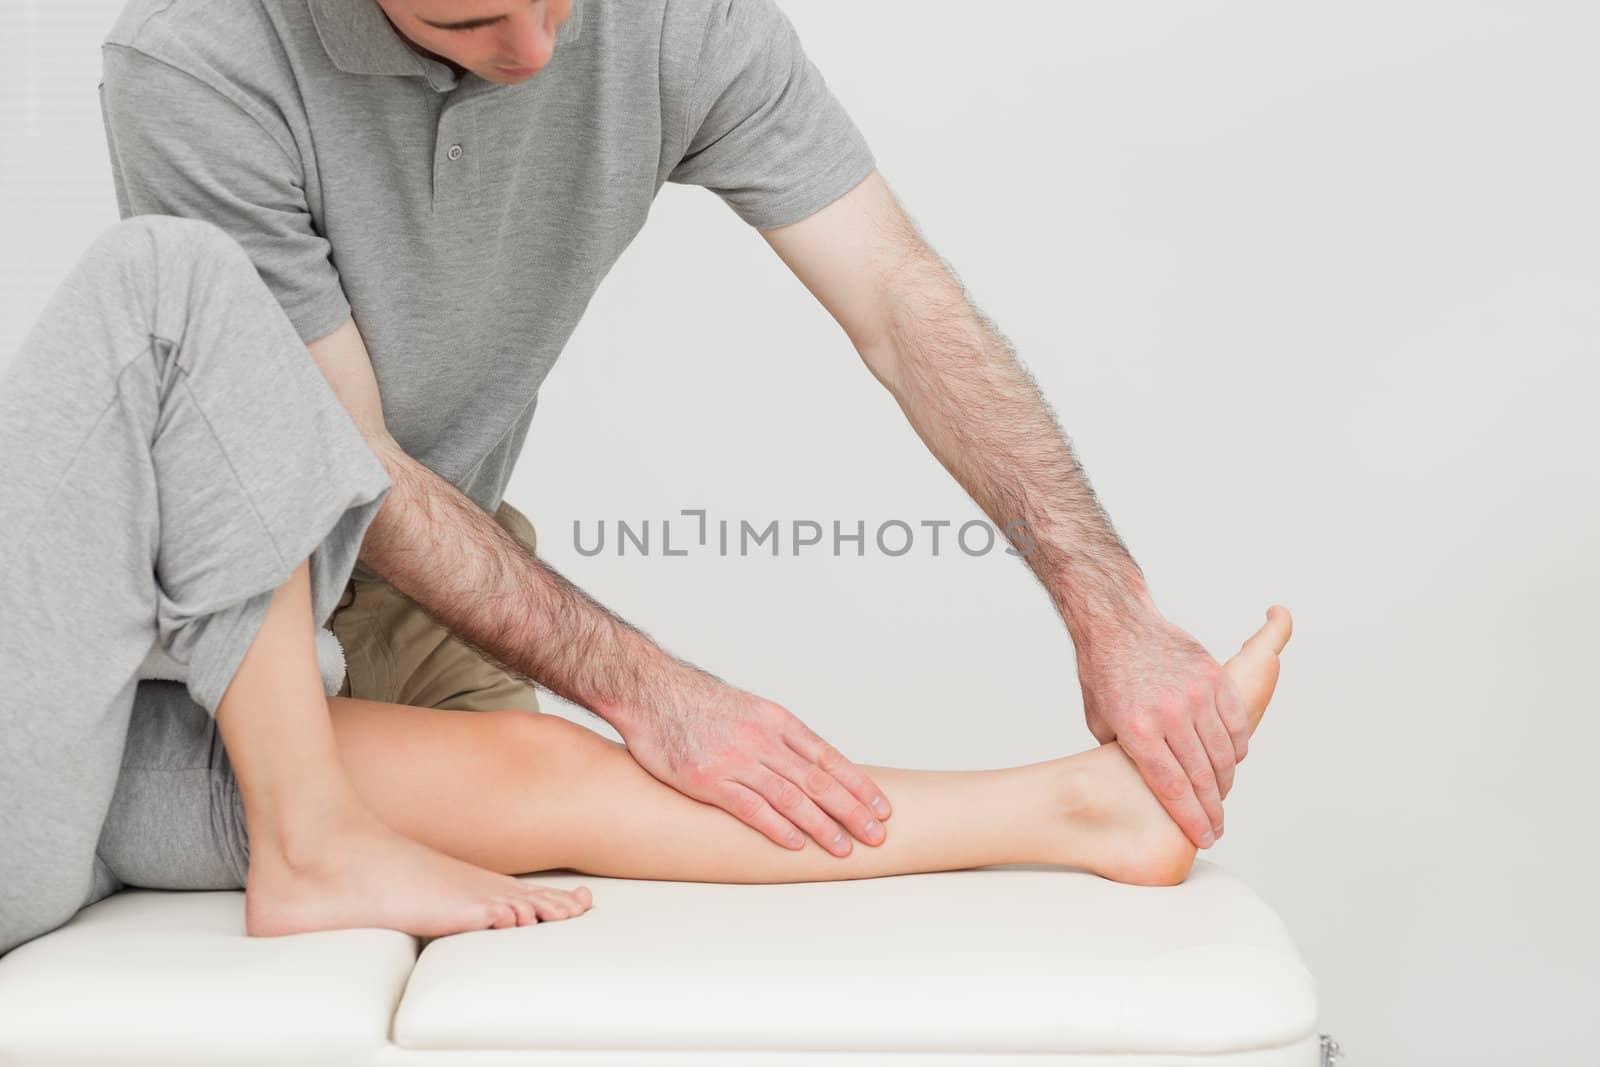 Calf of a patient being stretched by a doctor by Wavebreakmedia